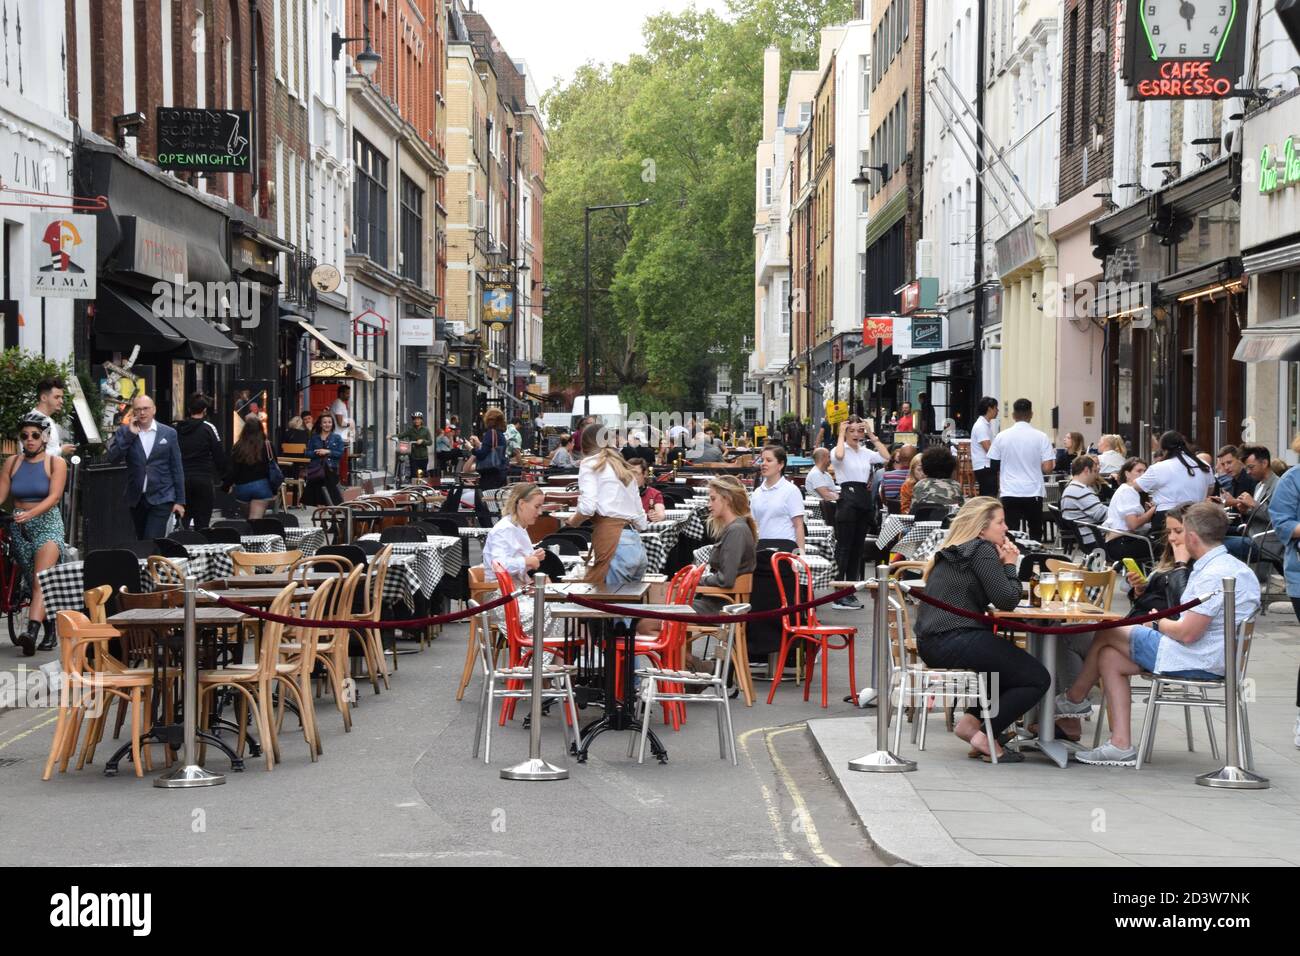 Crowd of people at bars and restaurants in Frith Street, Soho, London 2020. Sections of Soho have been blocked for traffic to allow temporary outdoor street seating and table service to facilitate social distancing during the pandemic. Stock Photo